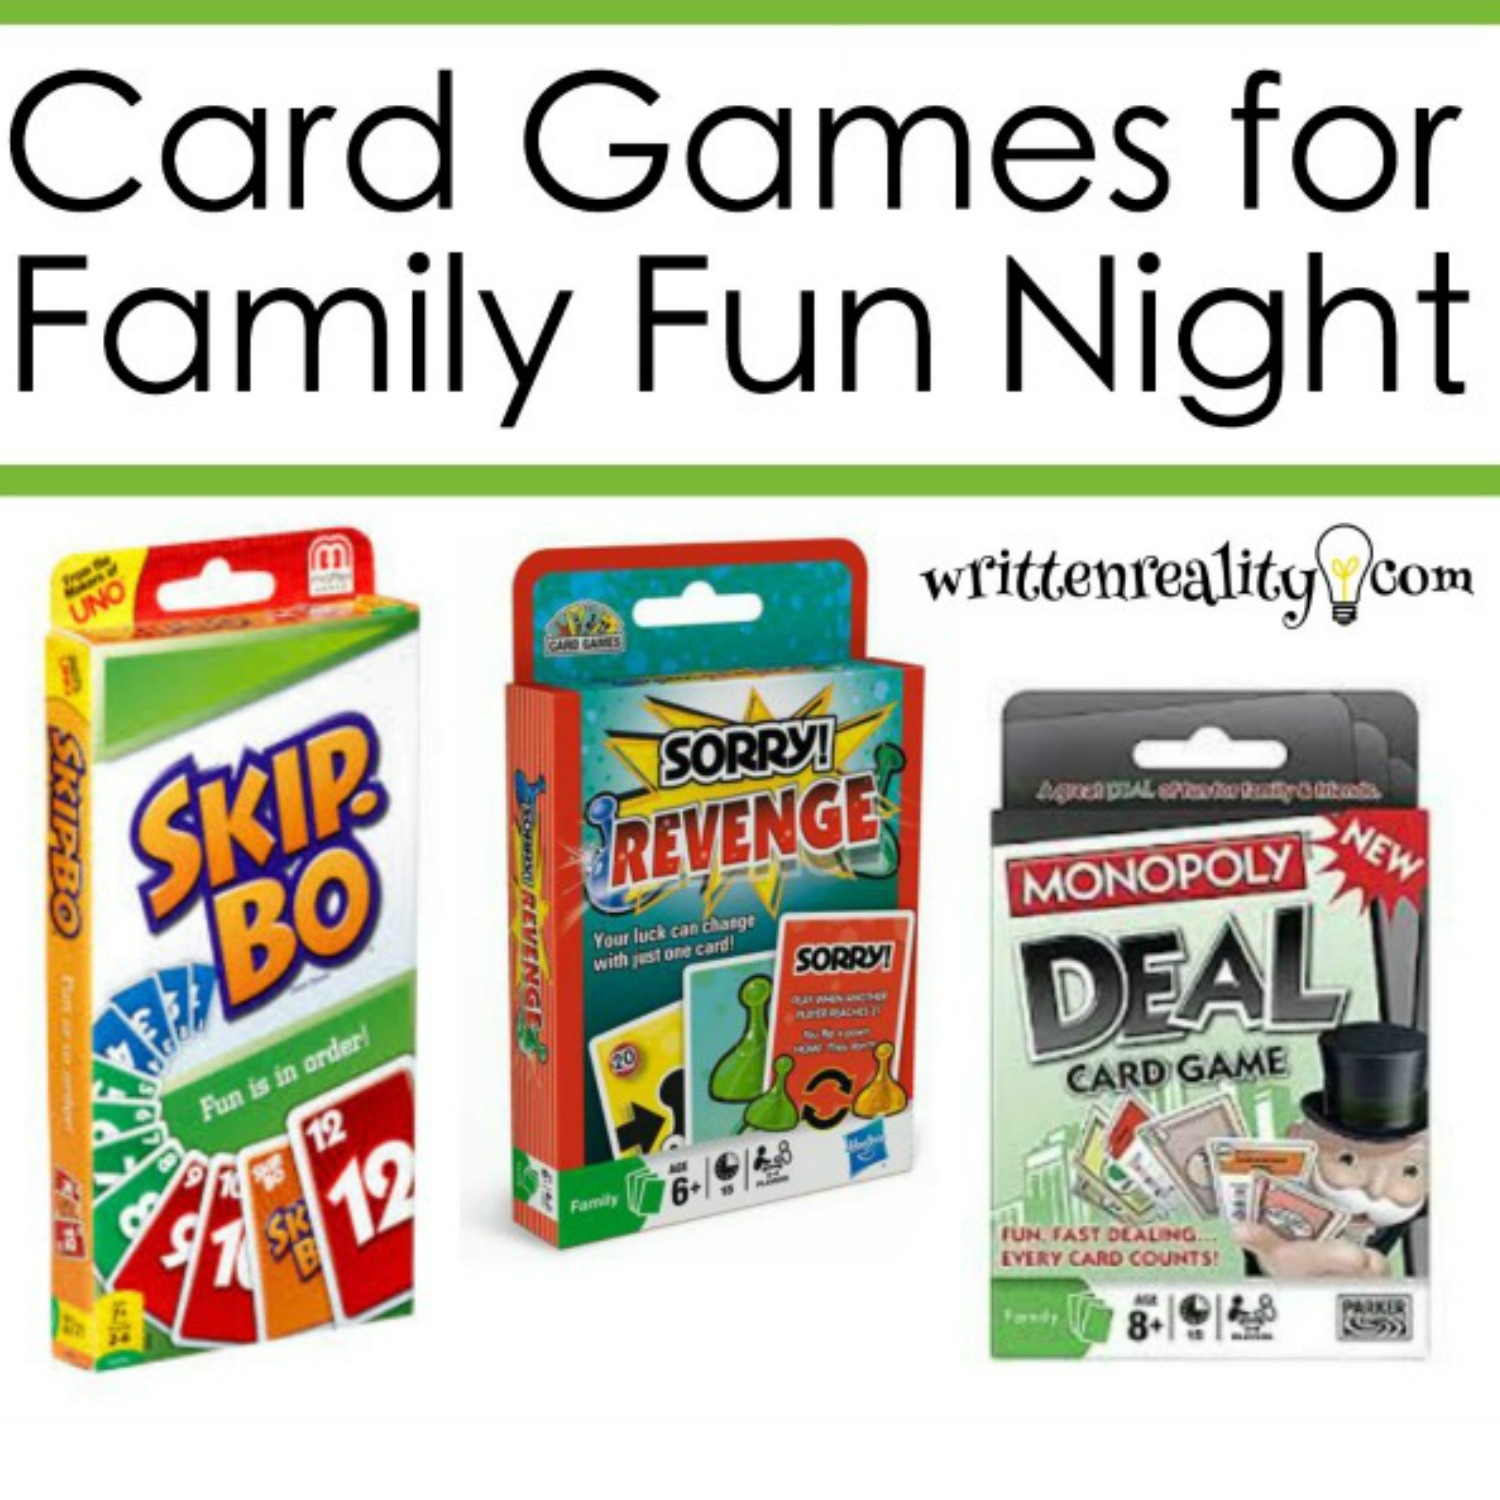 7 Best Card Games Kids Love To Play for Family Fun Night - Written Reality